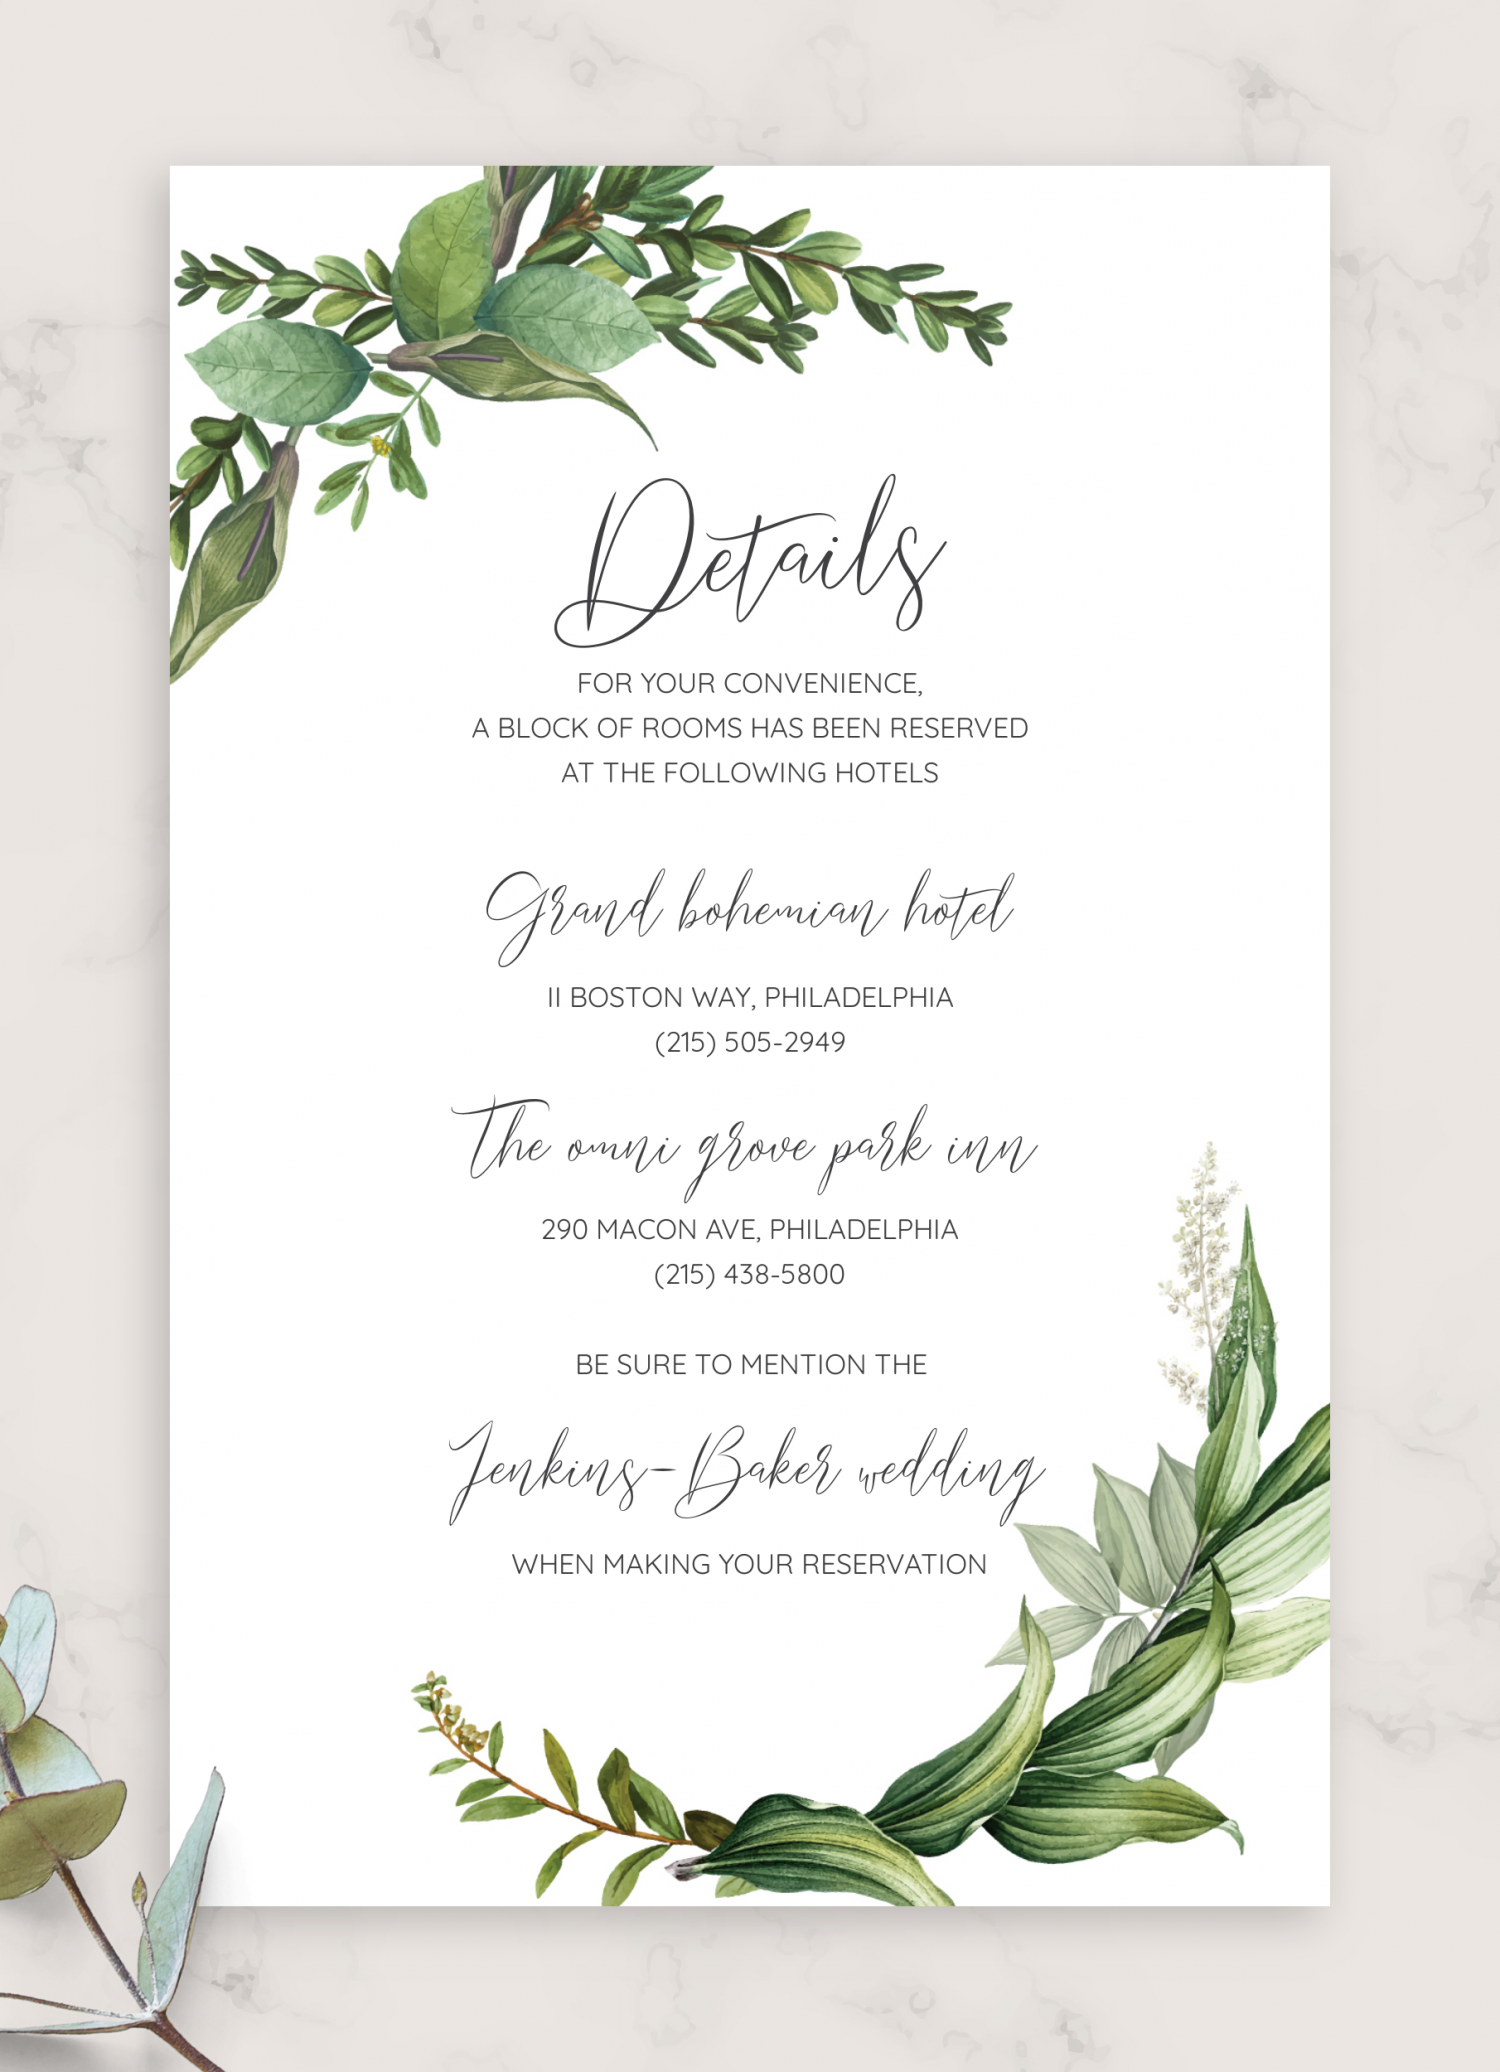 https://onplanners.com/sites/default/files/styles/template_fancy/public/template-images/printable-green-floral-wedding-invitation-template_5.png